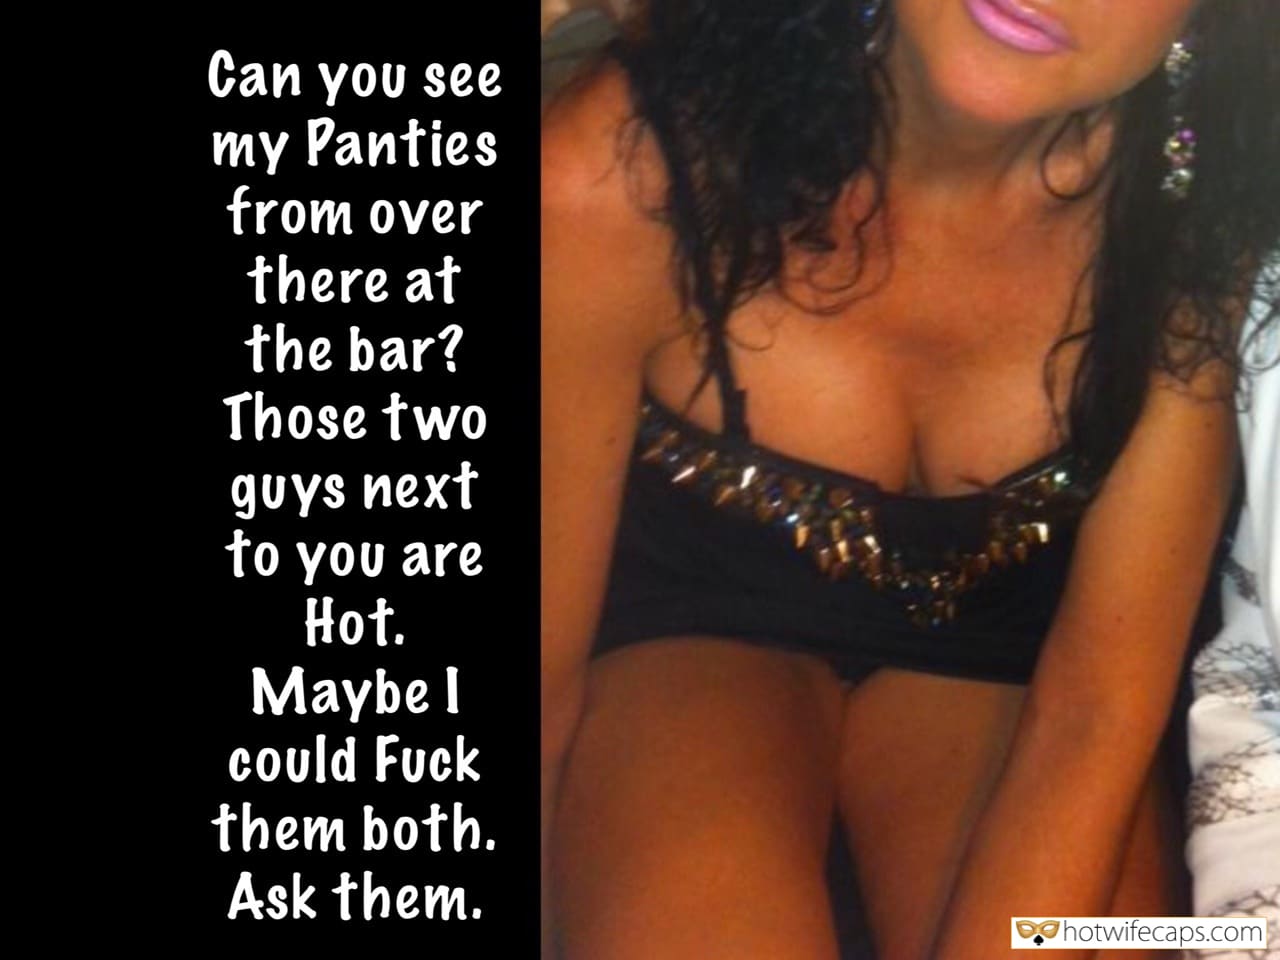 Sexy Memes hotwife caption: Can you see Ñy Panties from over there at the bar? Those two guys next to you are Hot. Maybe I could Fuck them both. Ask them. Get Those Studs for Me Darling